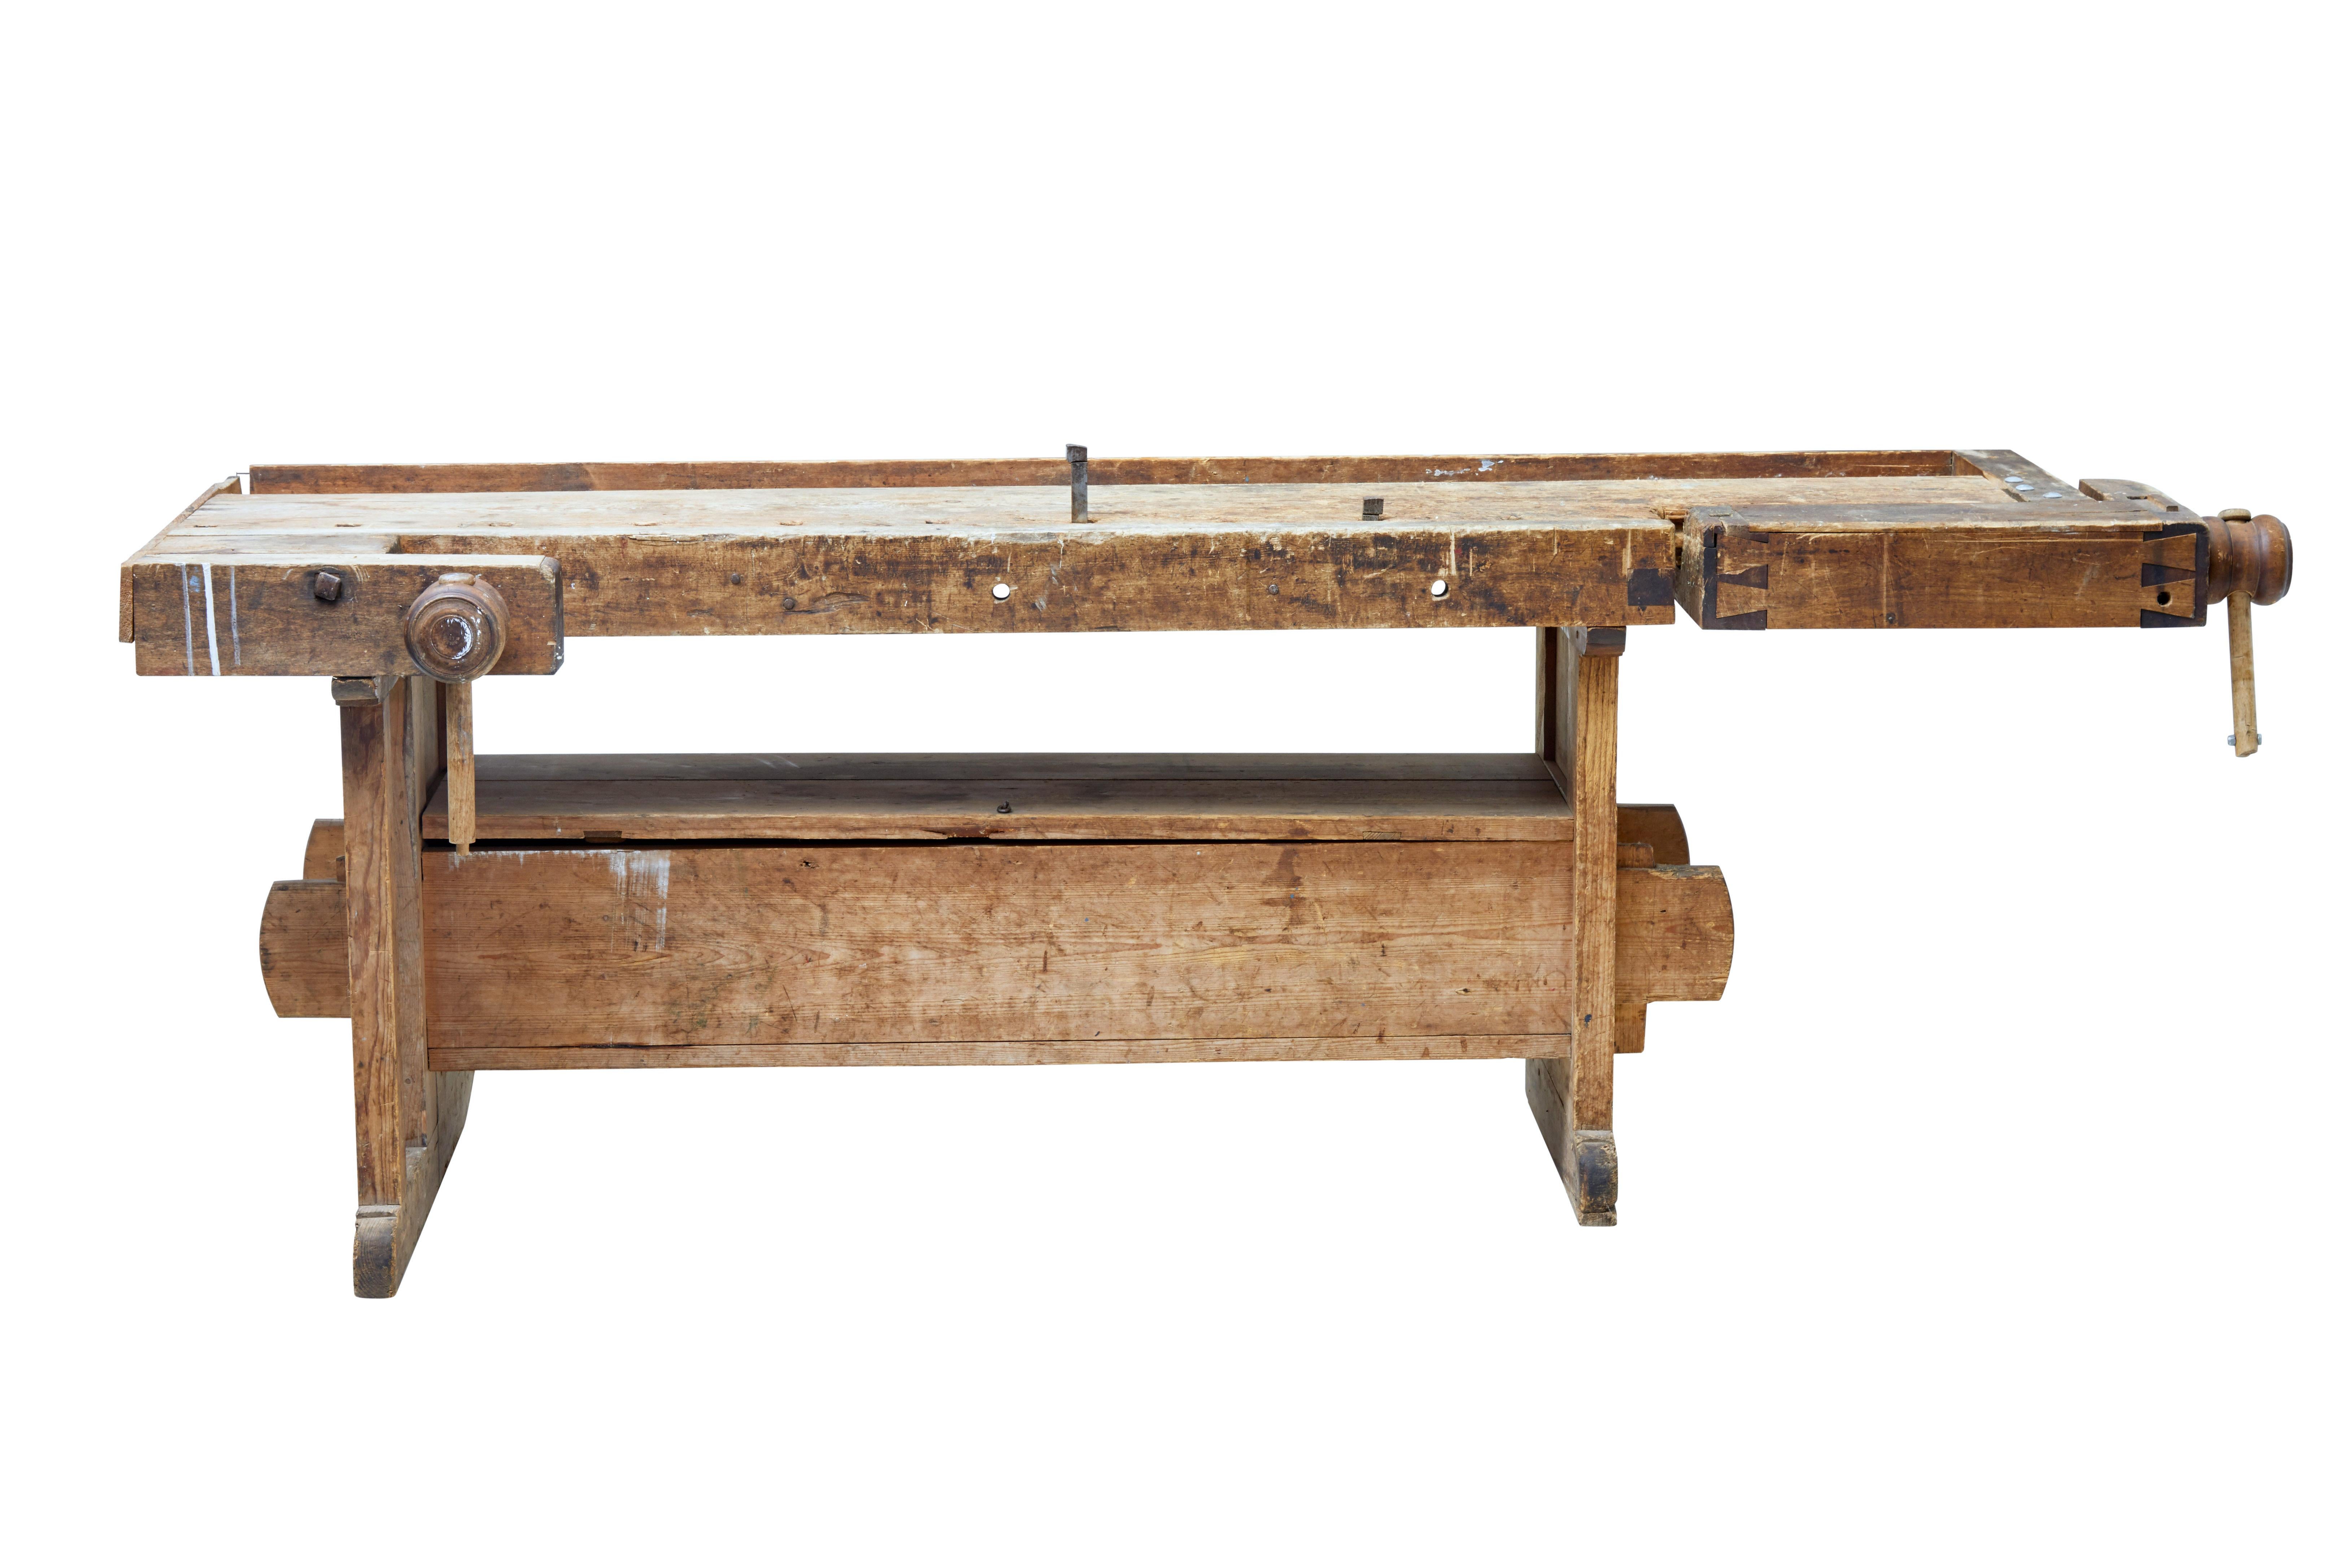 Here we offer a fine 19th century Swedish pine work bench, circa 1880.

Working double clamp on one end, and a threaded clamp to the front.

Obvious signs of use, but fully functional. Standing on trestle legs united by stretchers and held in